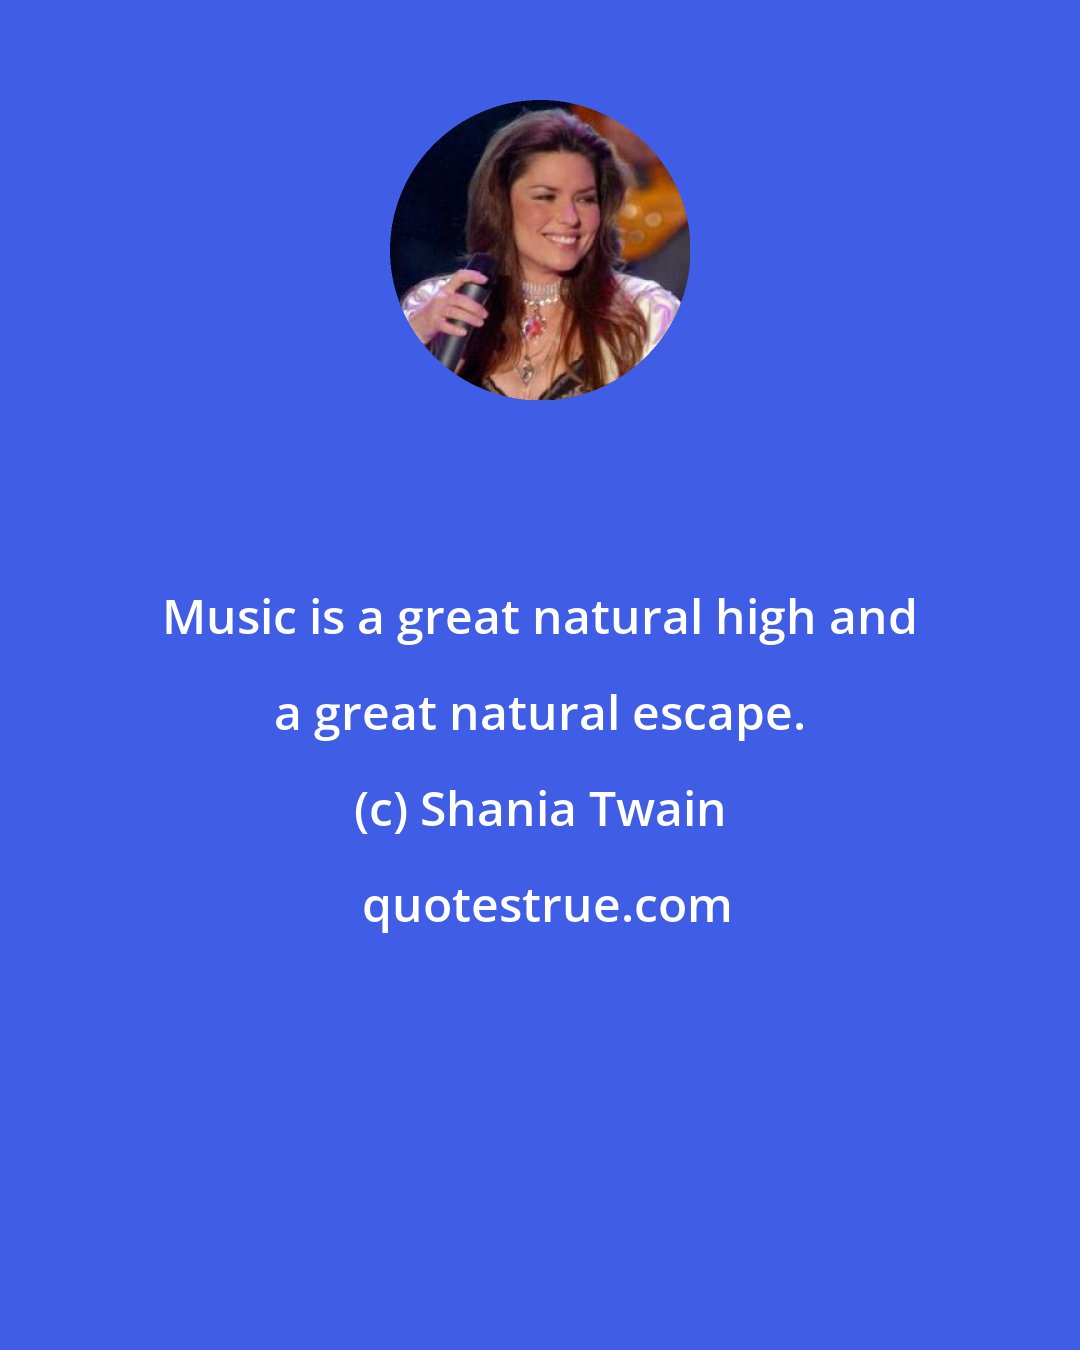 Shania Twain: Music is a great natural high and a great natural escape.